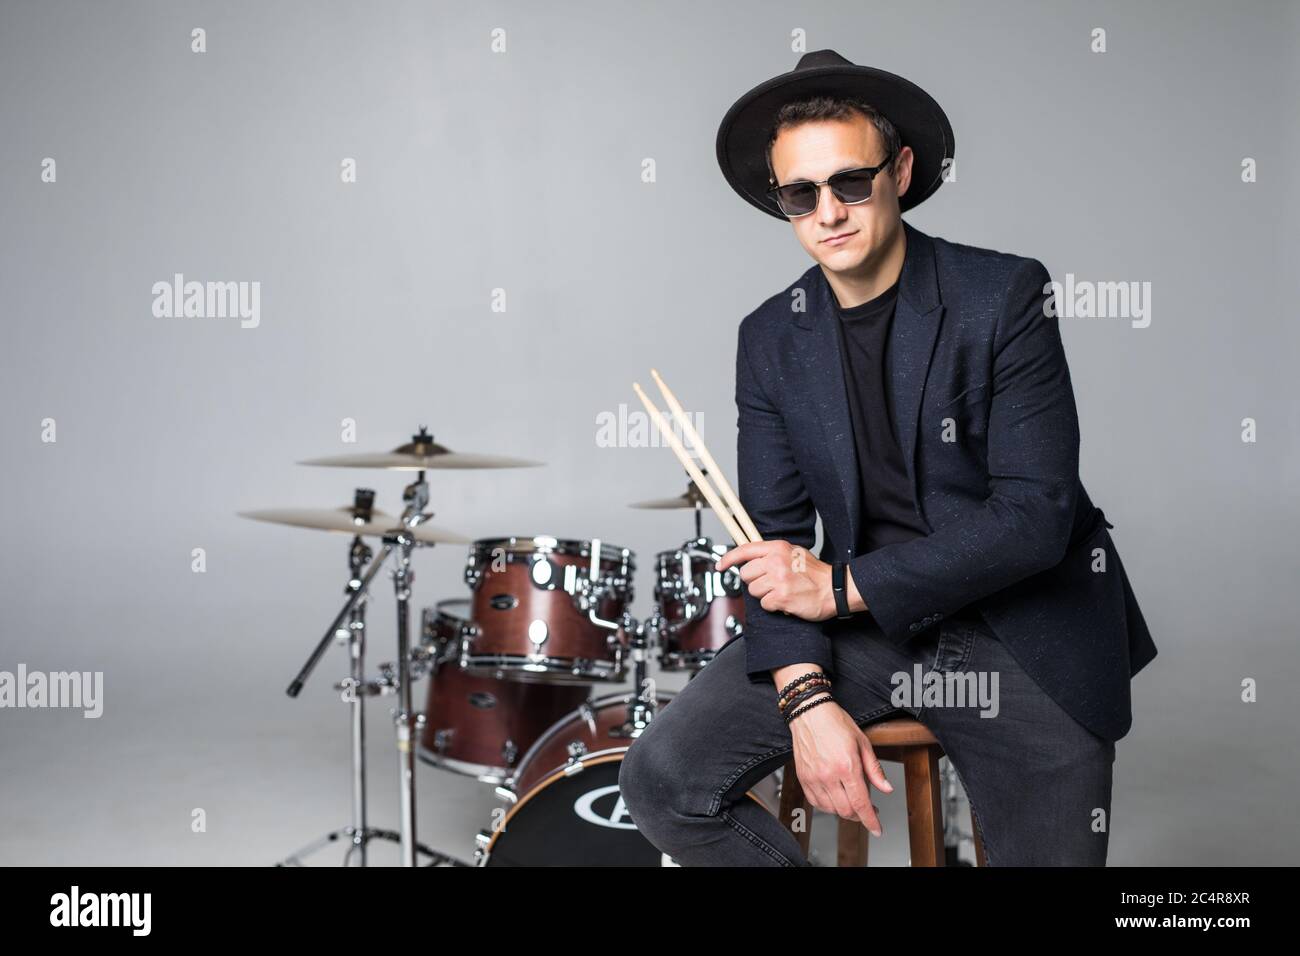 Young man drummer behind drum set and plays the drums in studio smiling Stock Photo